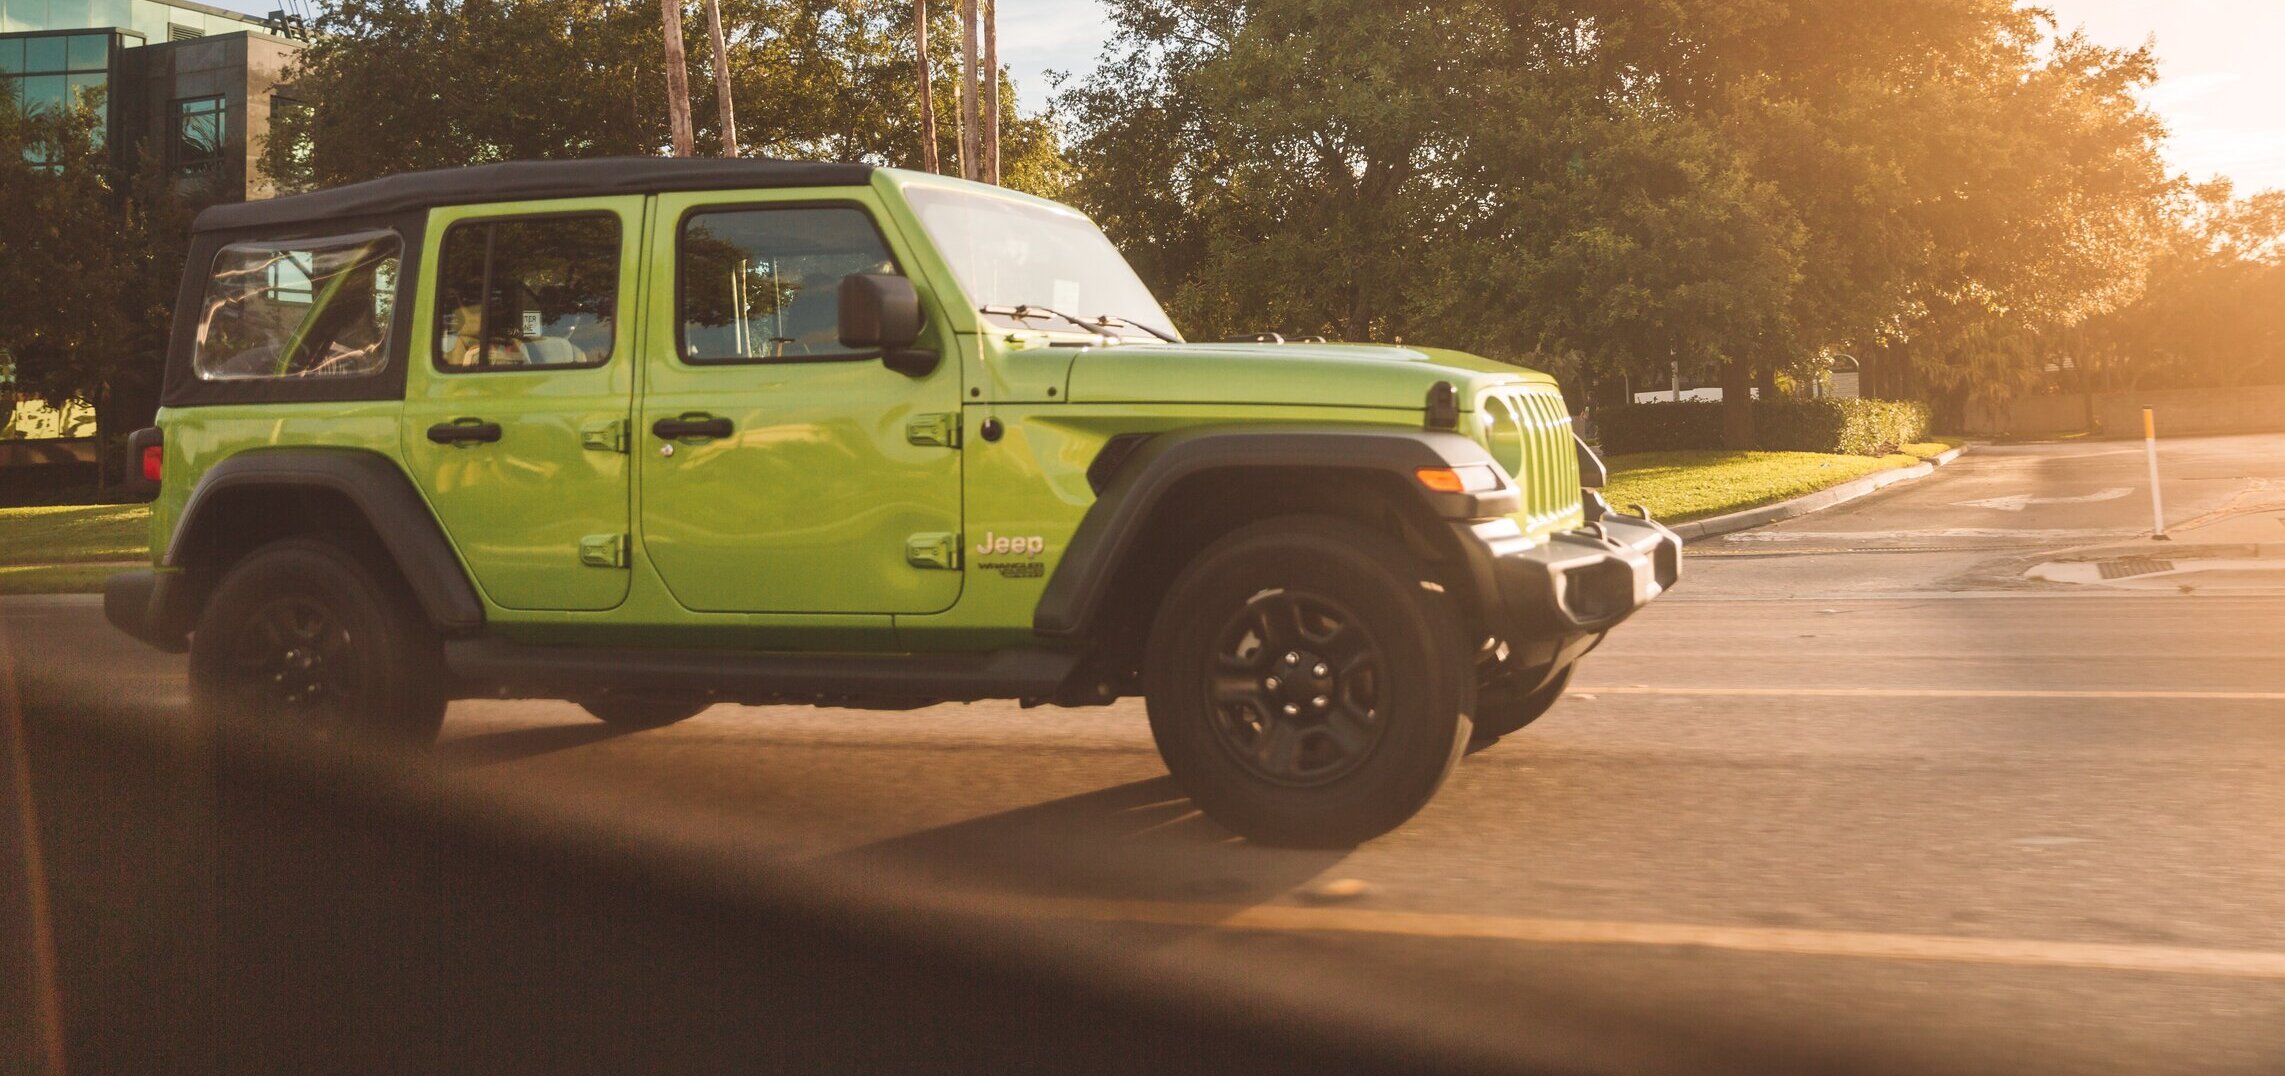 green Jeep in parking lot